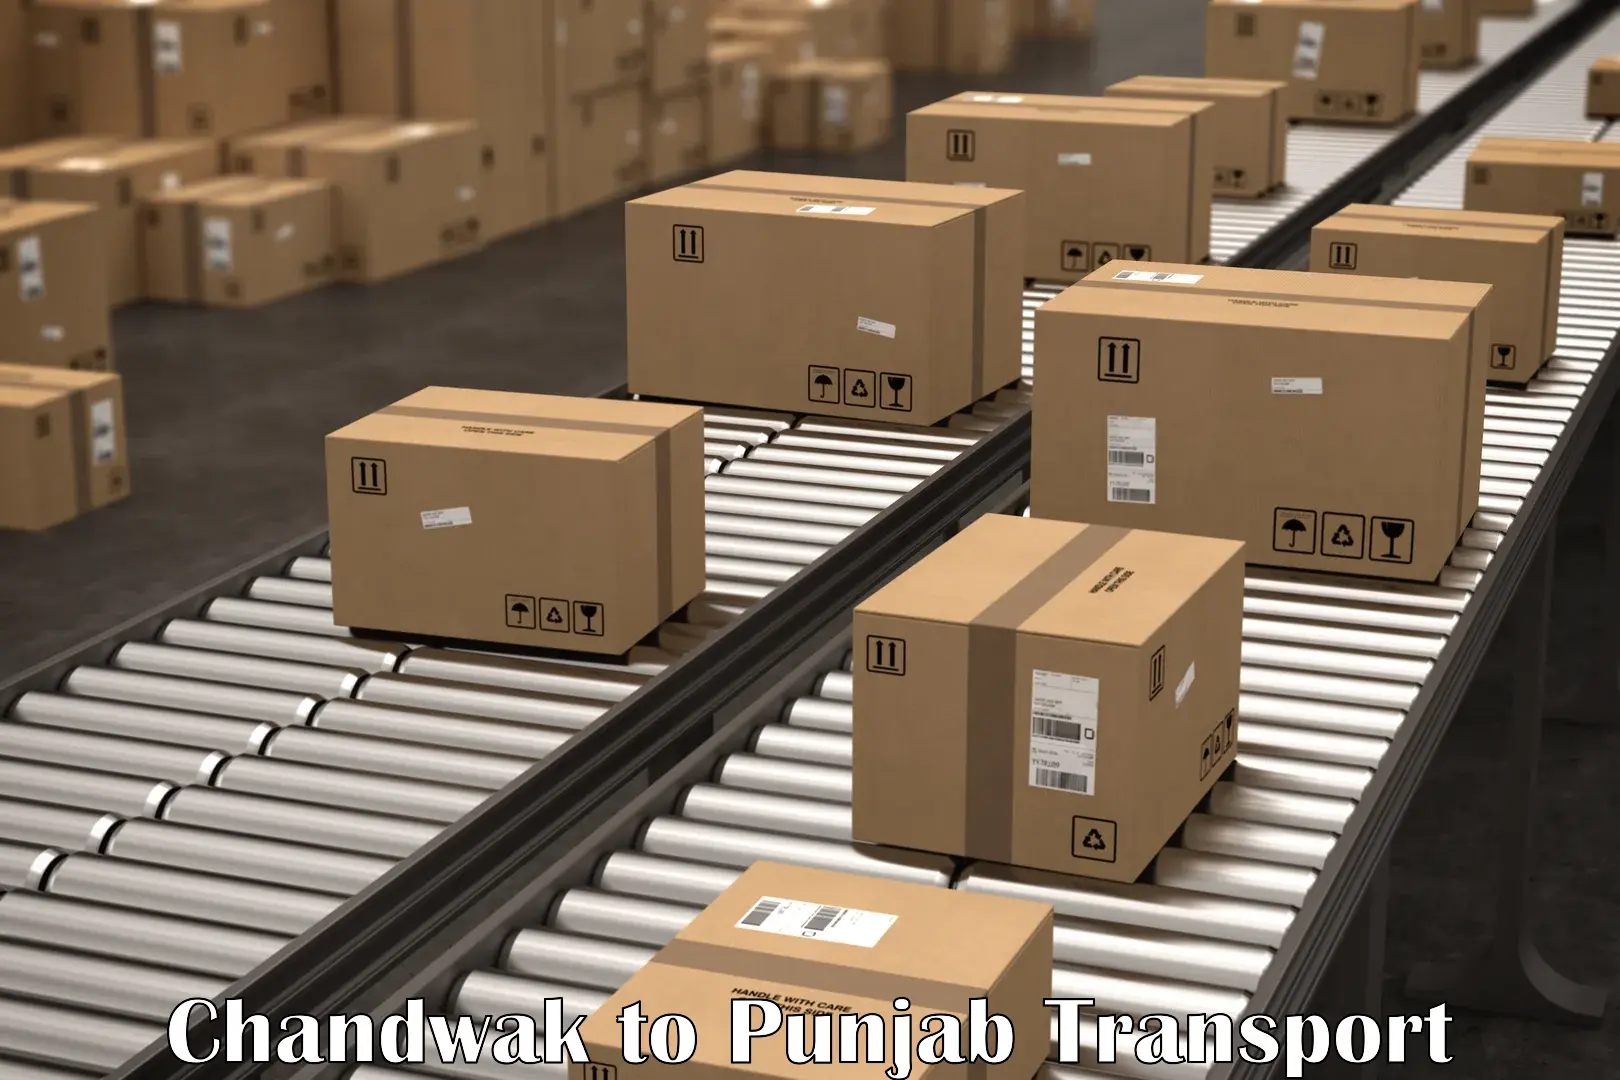 Daily parcel service transport in Chandwak to Sangrur